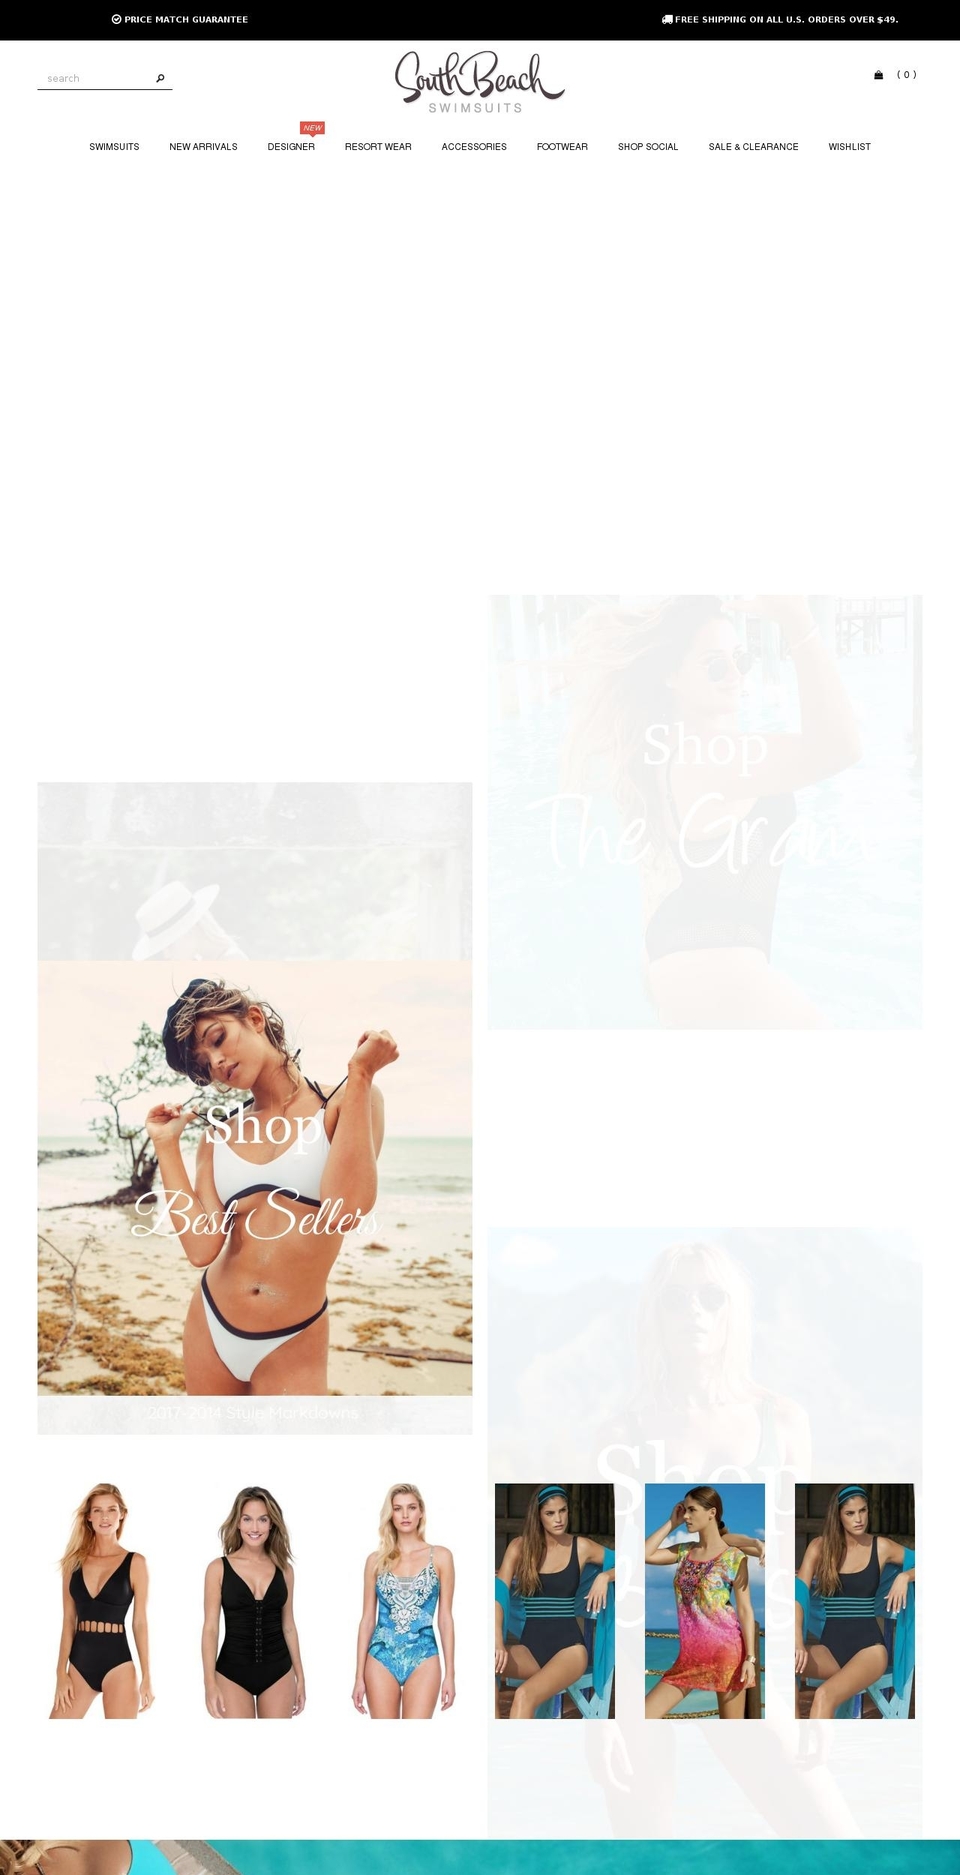 Made With ❤ By Minion Made - Updated Checkout Shopify theme site example lspaceswim.com